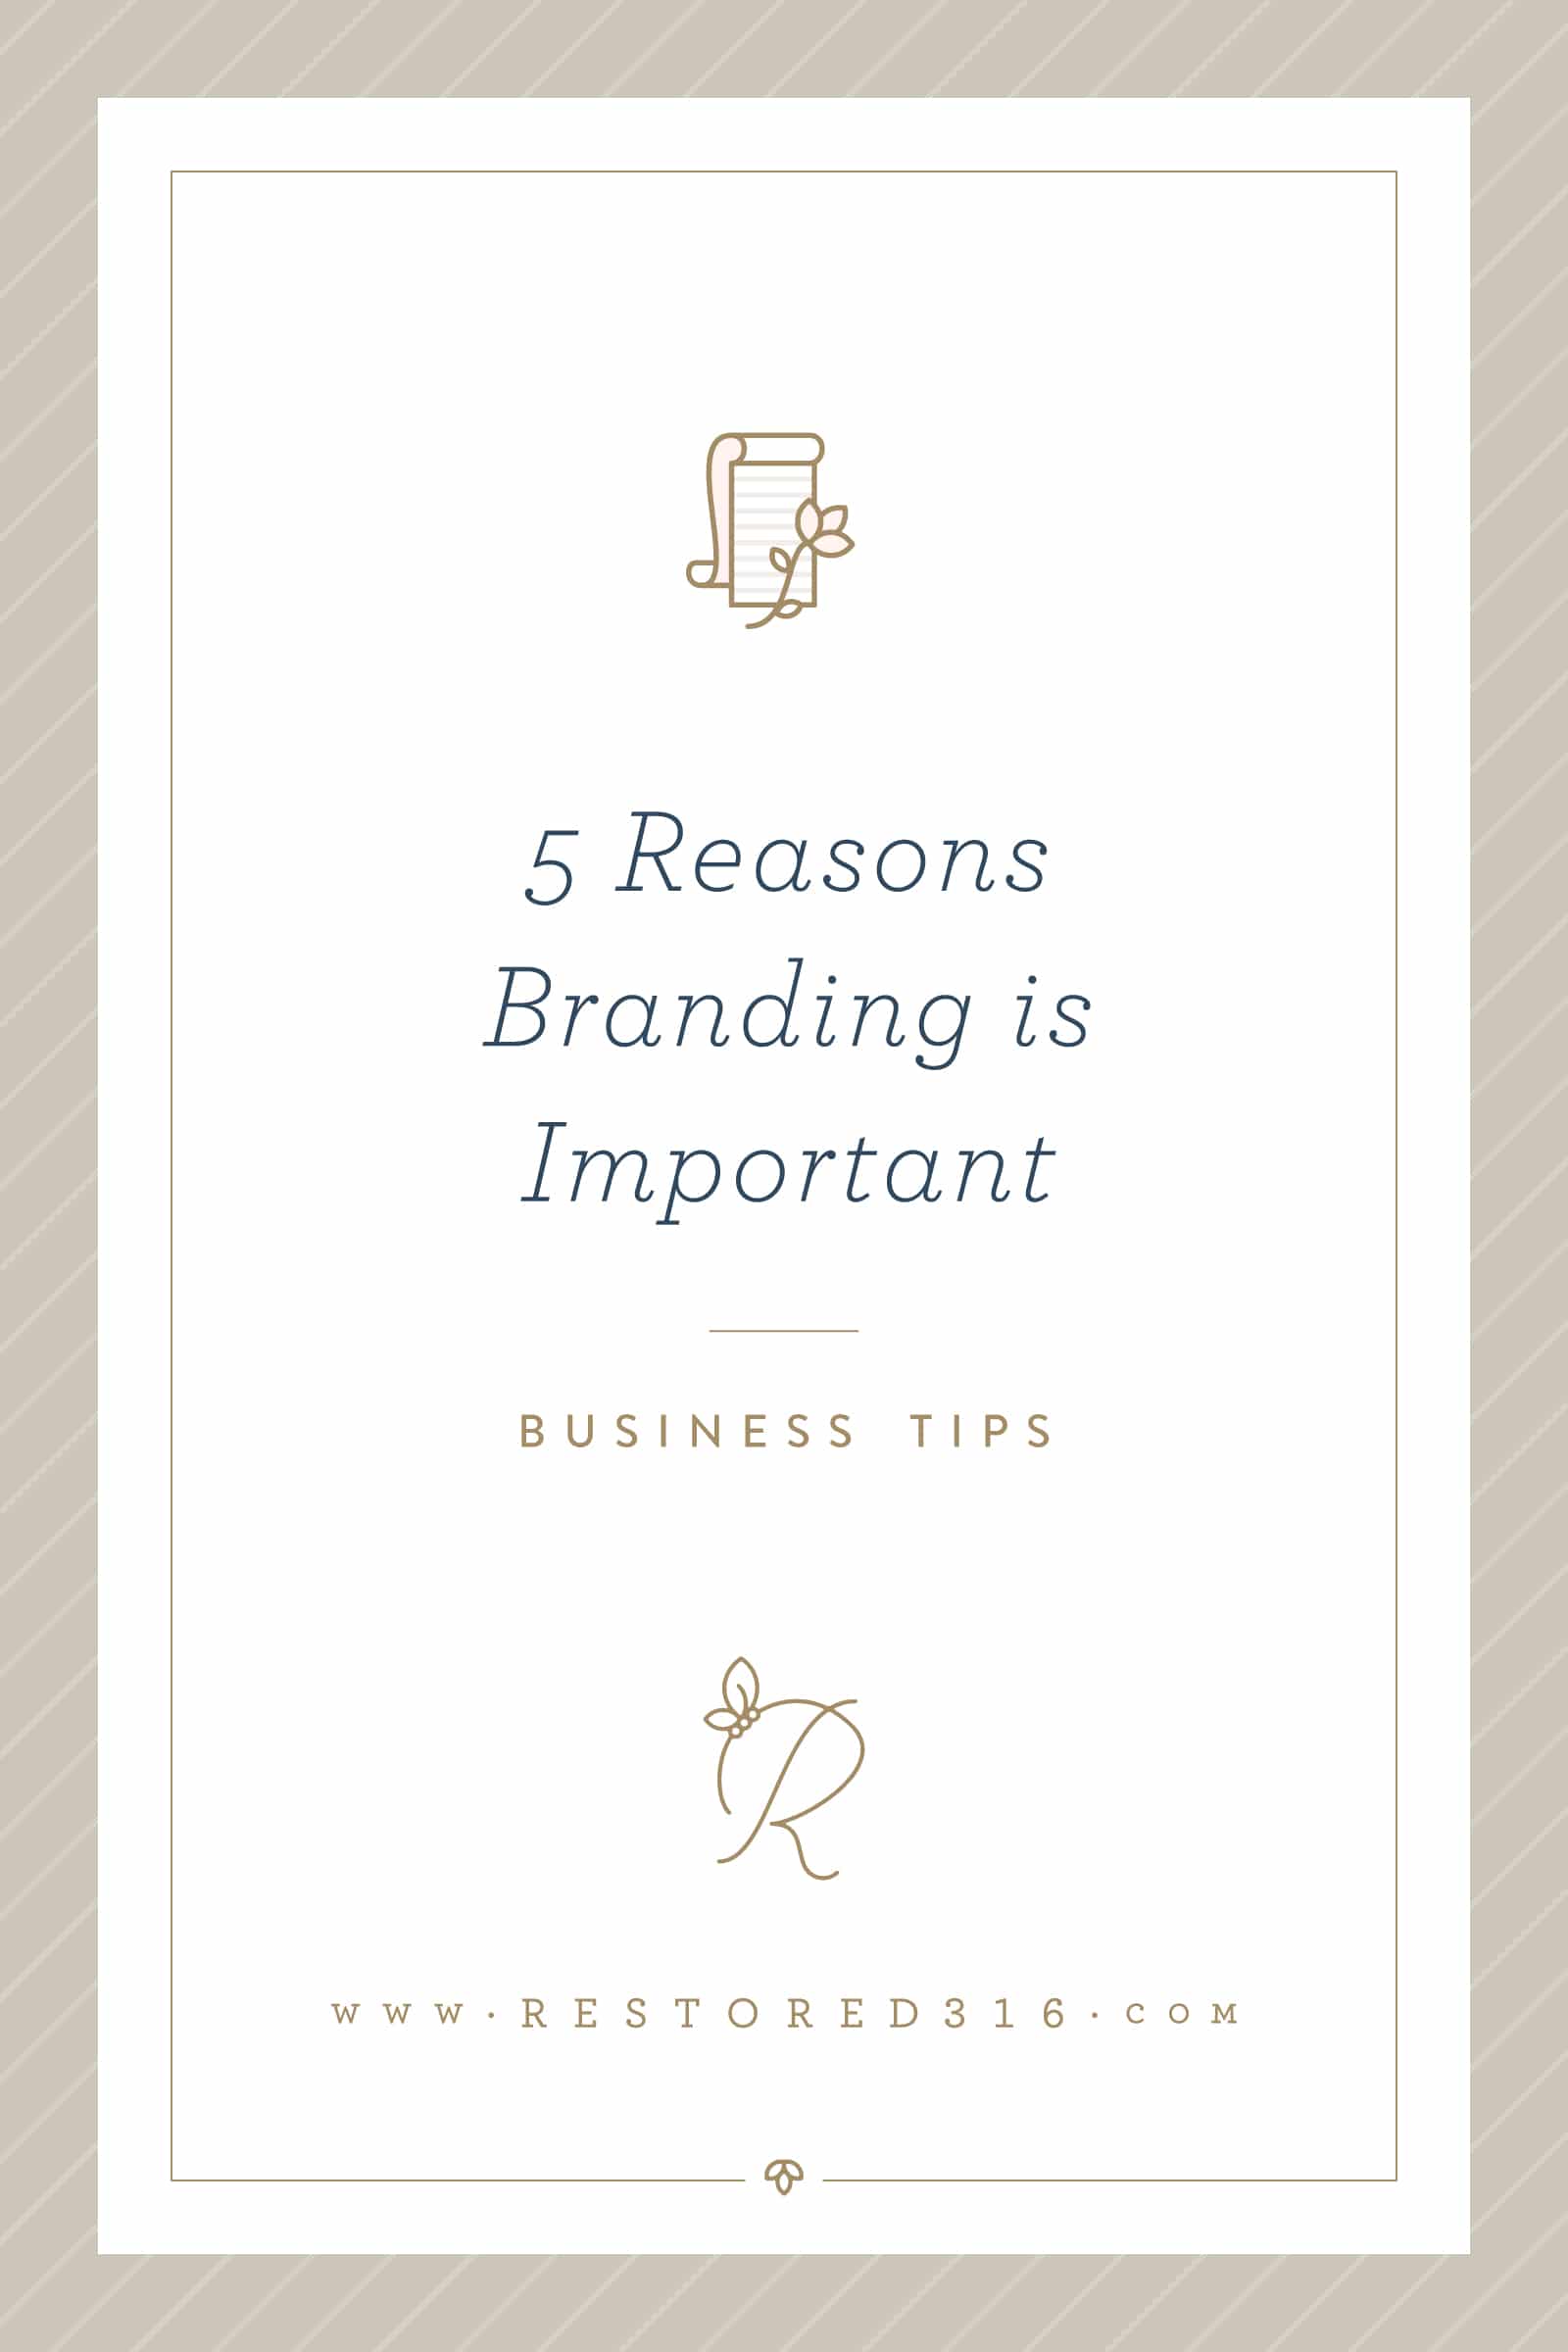 The Importance of Branding